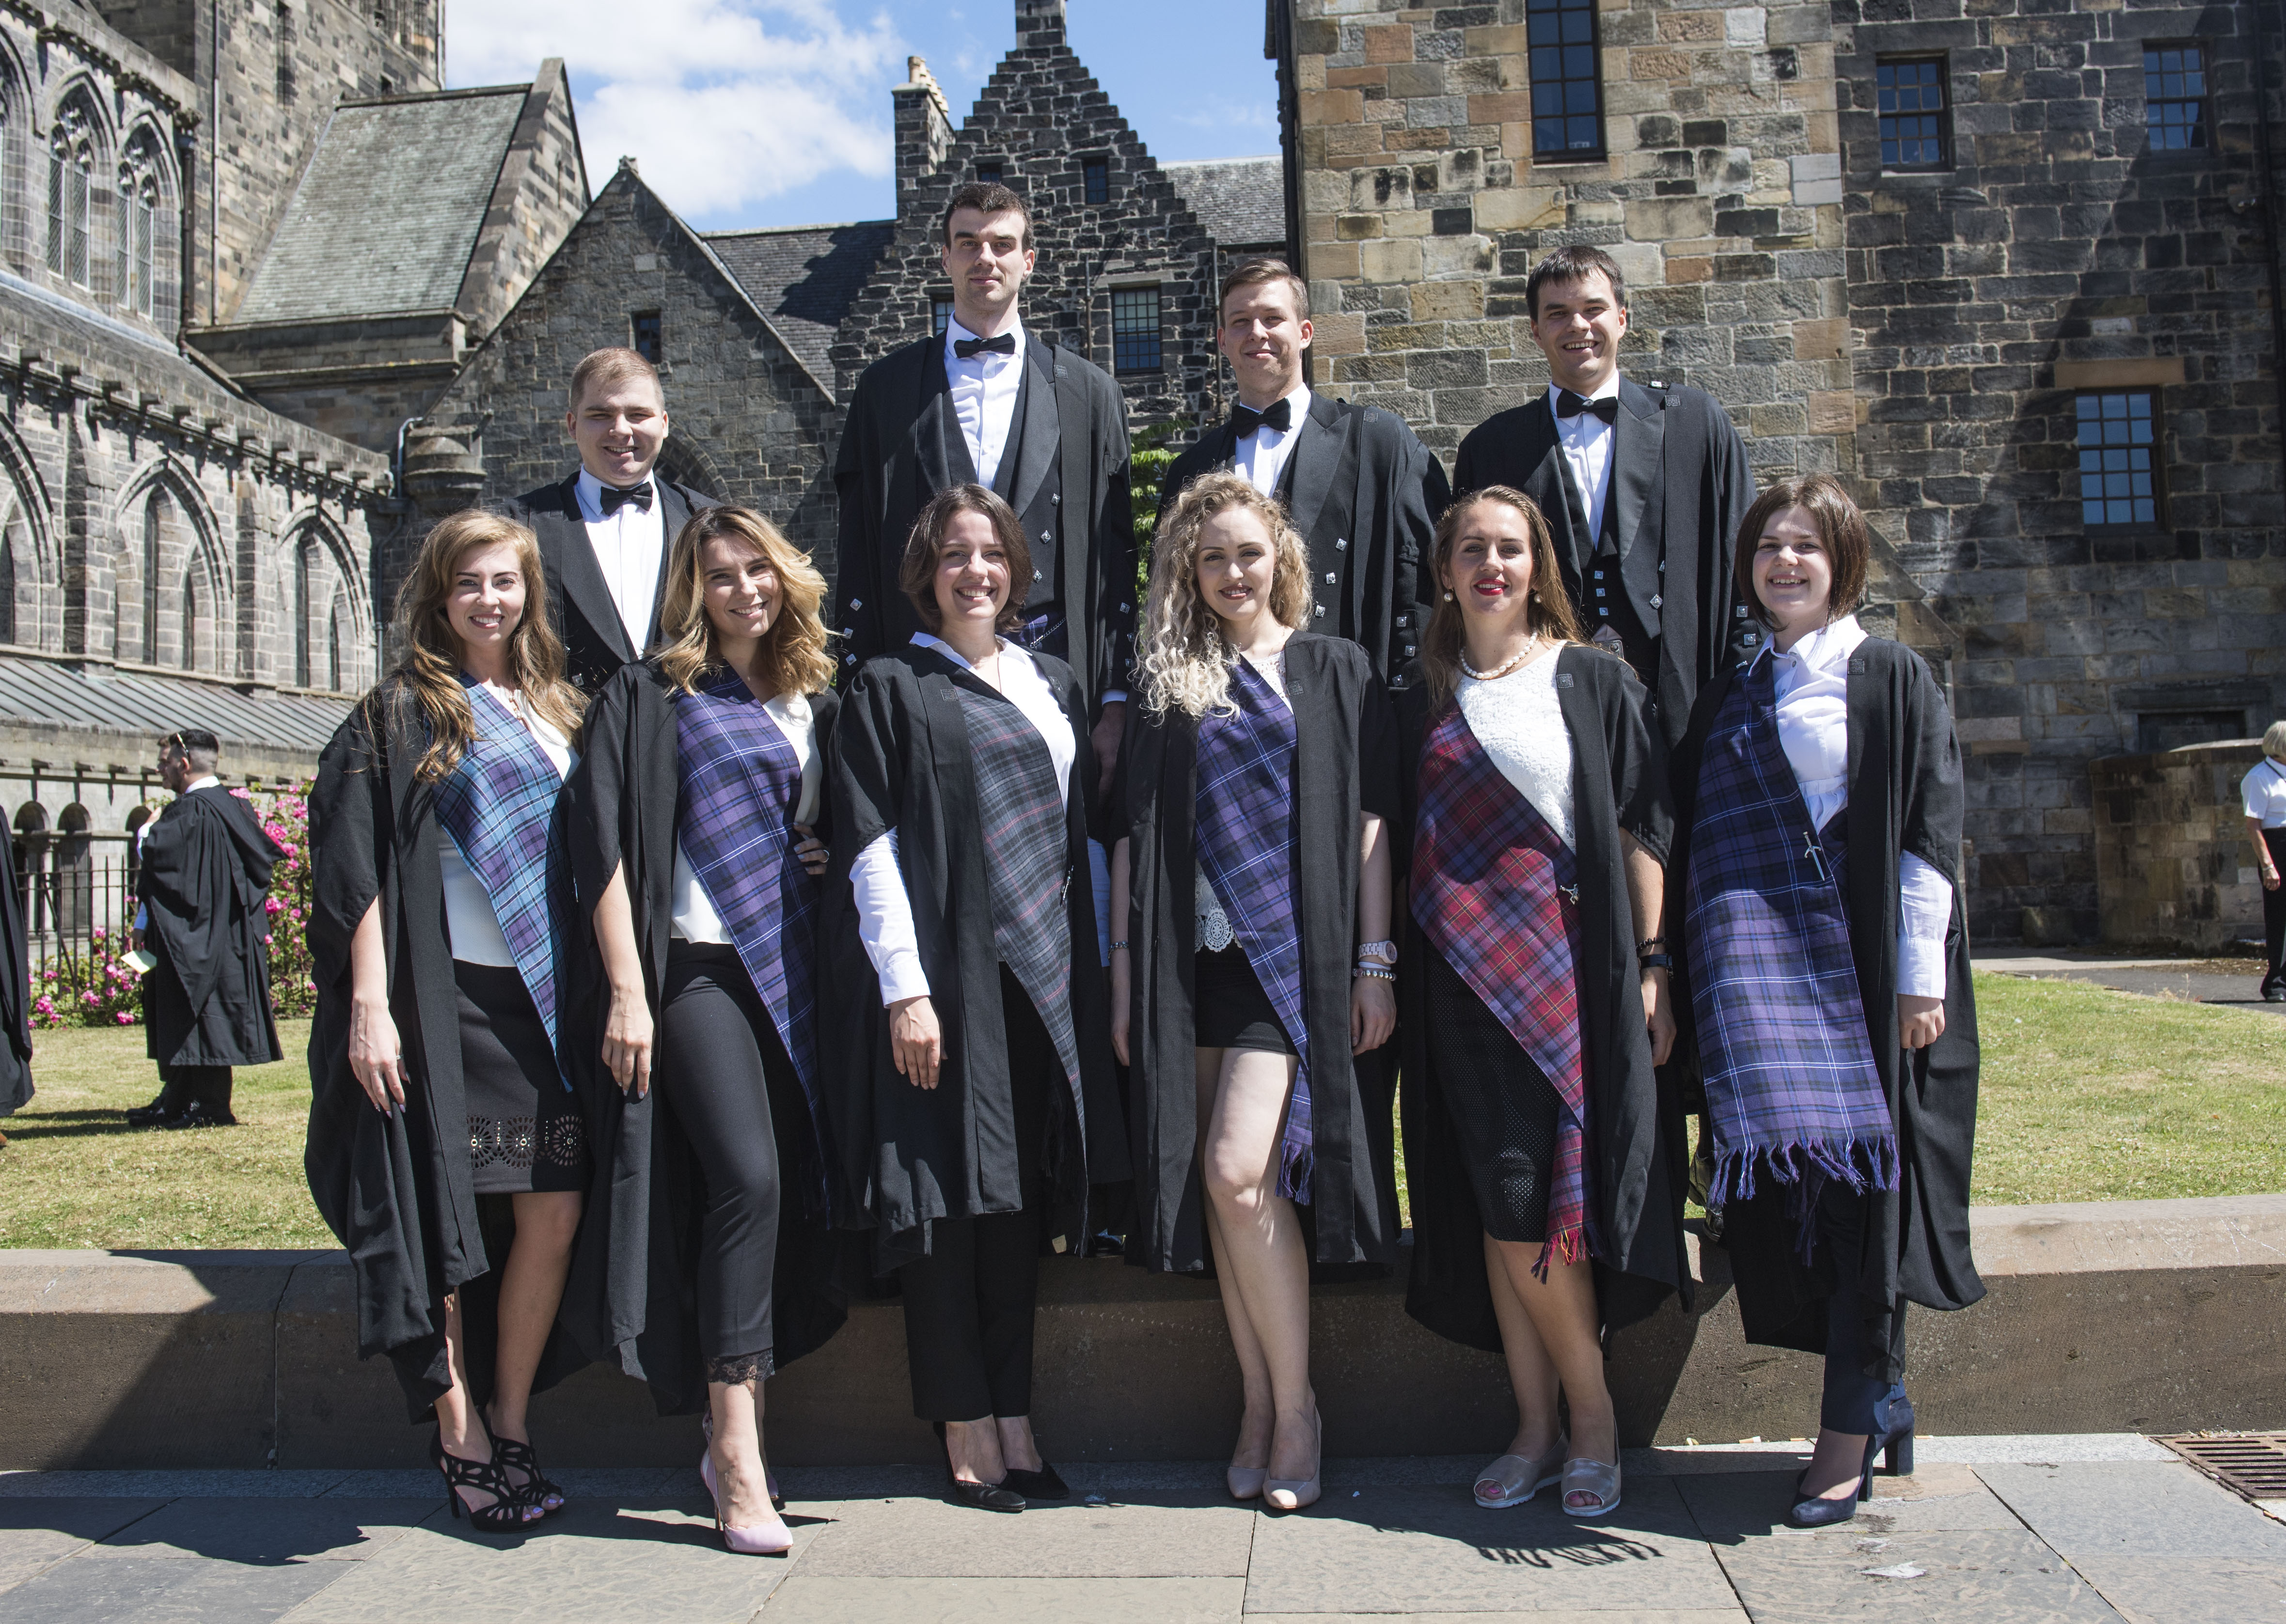 Group of students in graduation gowns with tartan shawls